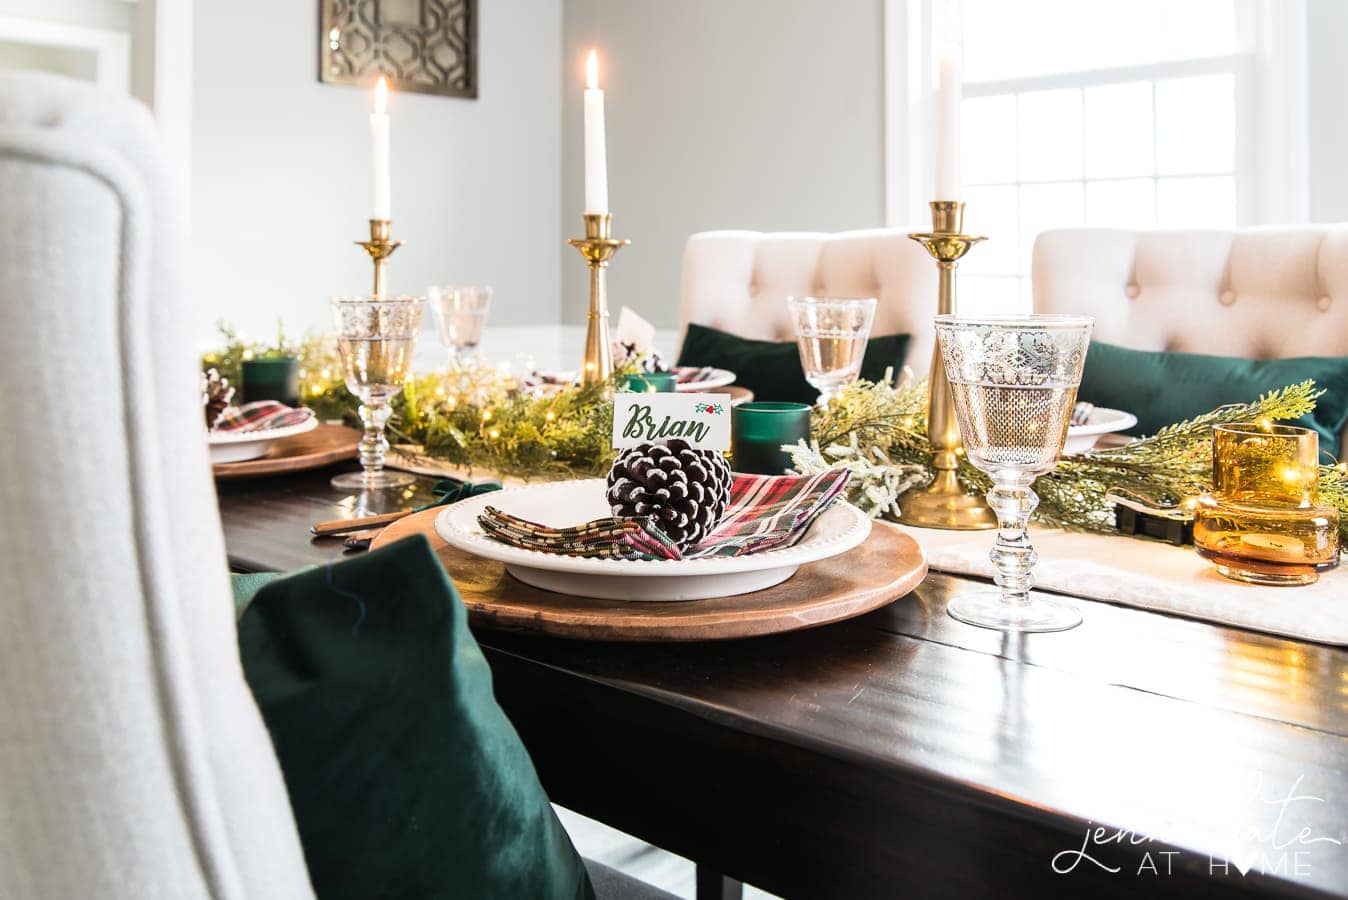 Simple and elegant traditional Christmas place settings